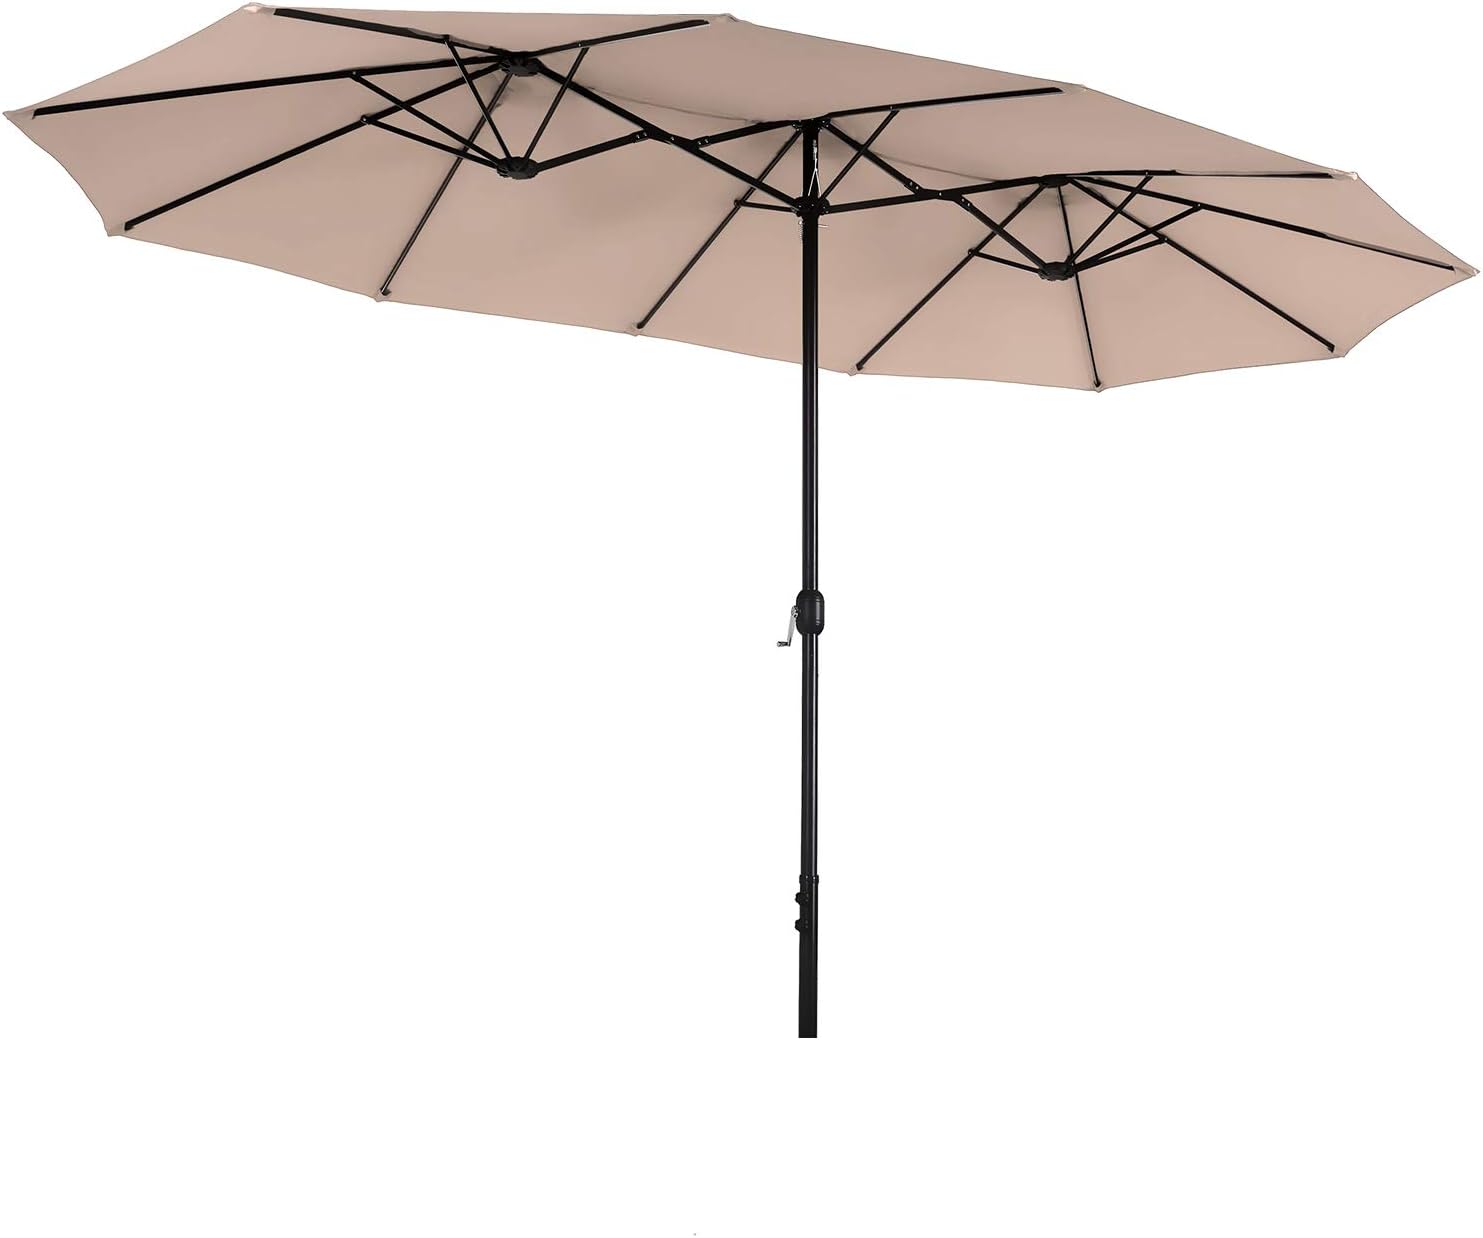 PHI VILLA 13 ft Outdoor Patio Umbrella, Large Rectangular Double Sided Market Table Twin Umbrellas with Crank Handle for Deck Pool